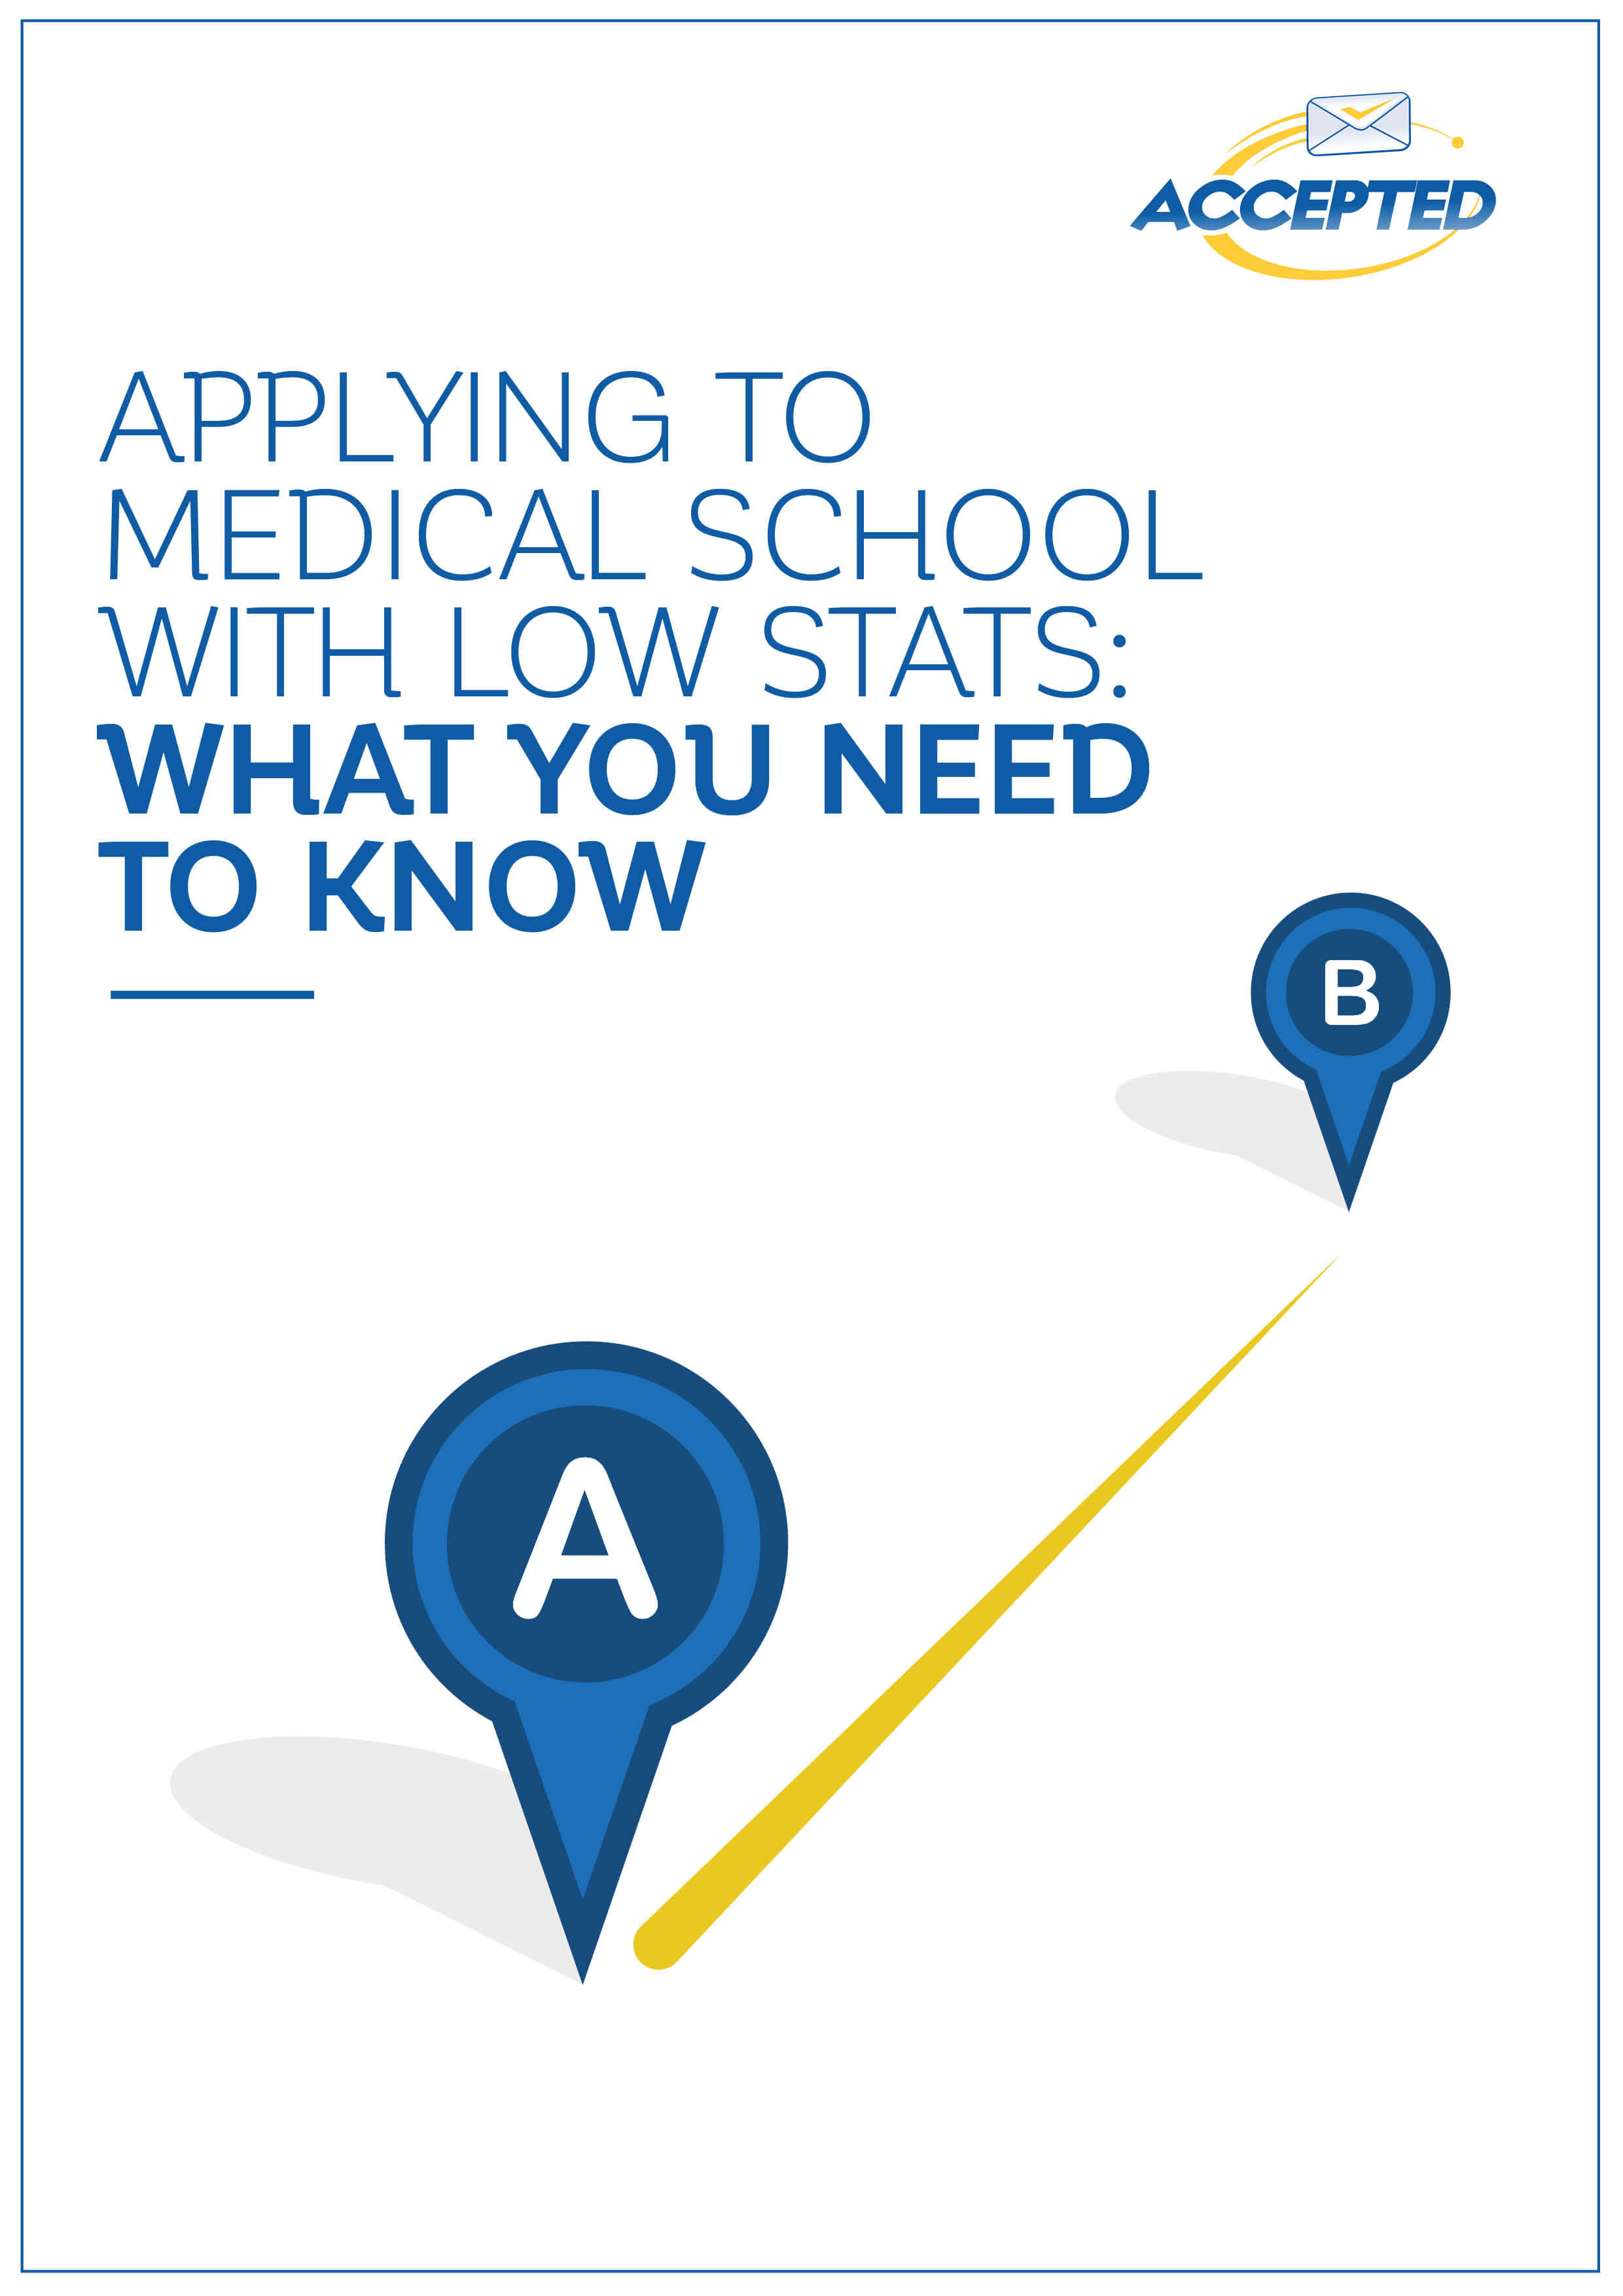 Applying to Medical School with Low Stats: What You Need to Know